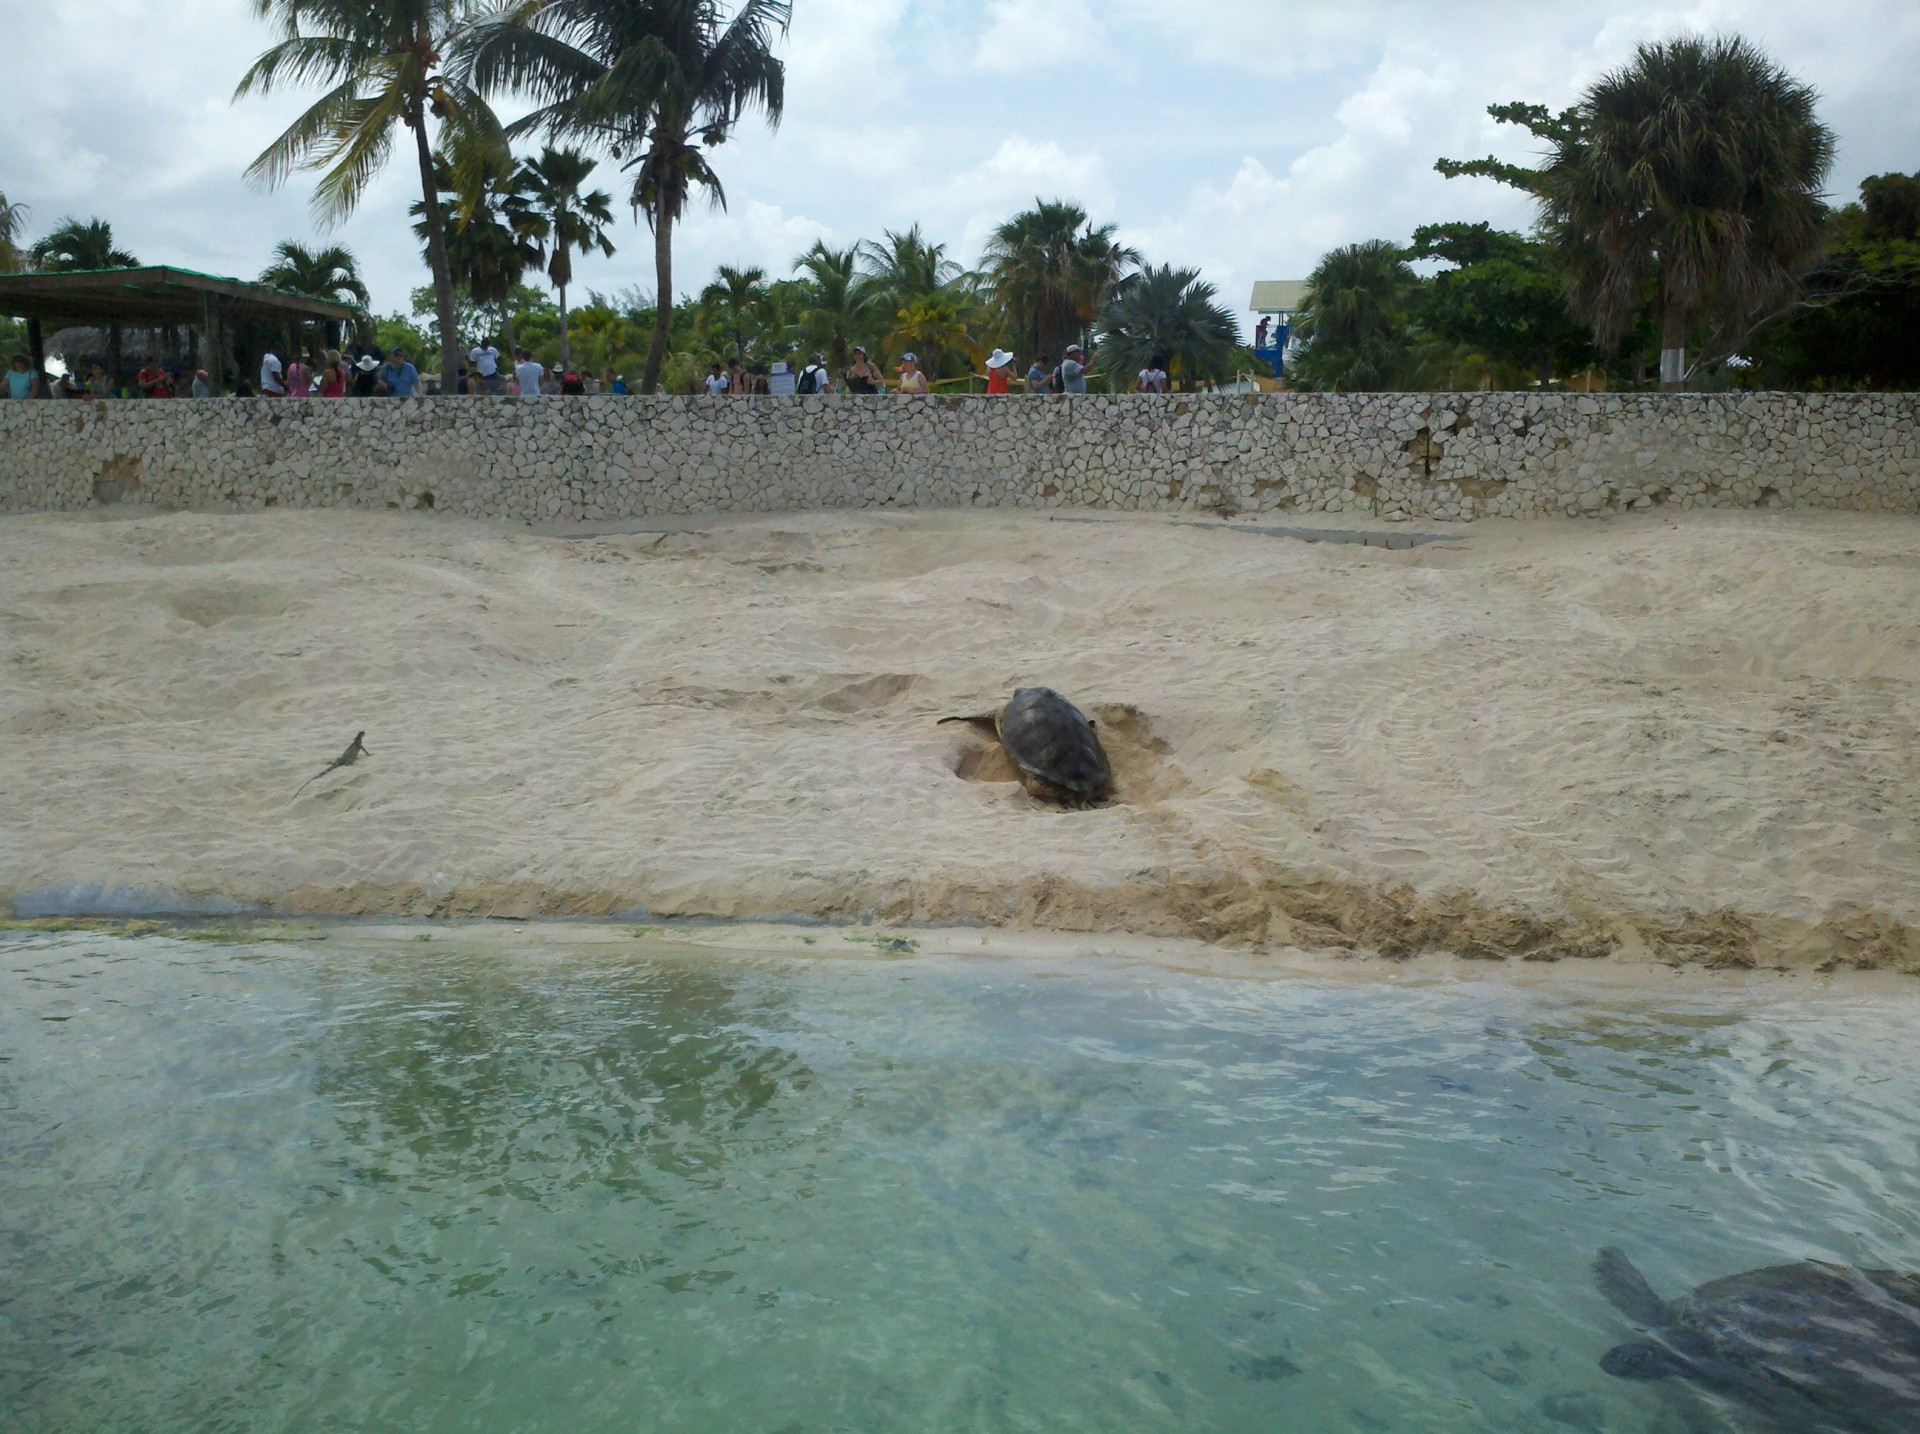 Cayman Island Turtle Farm is the only place in the world that raises sea turtles to be released.